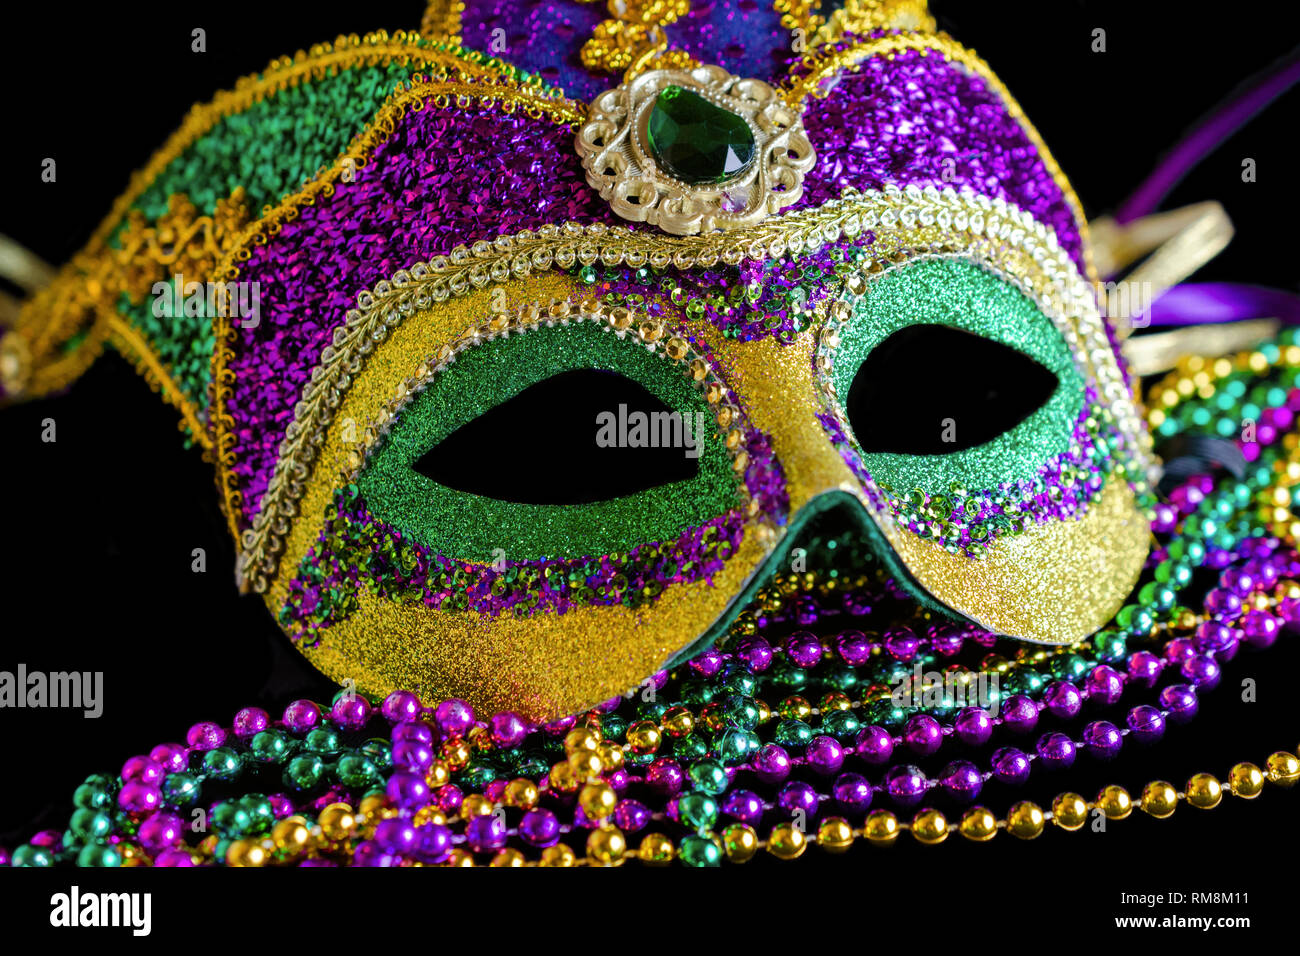 Jester carnival mask with beads in foreground on a black background. Stock Photo